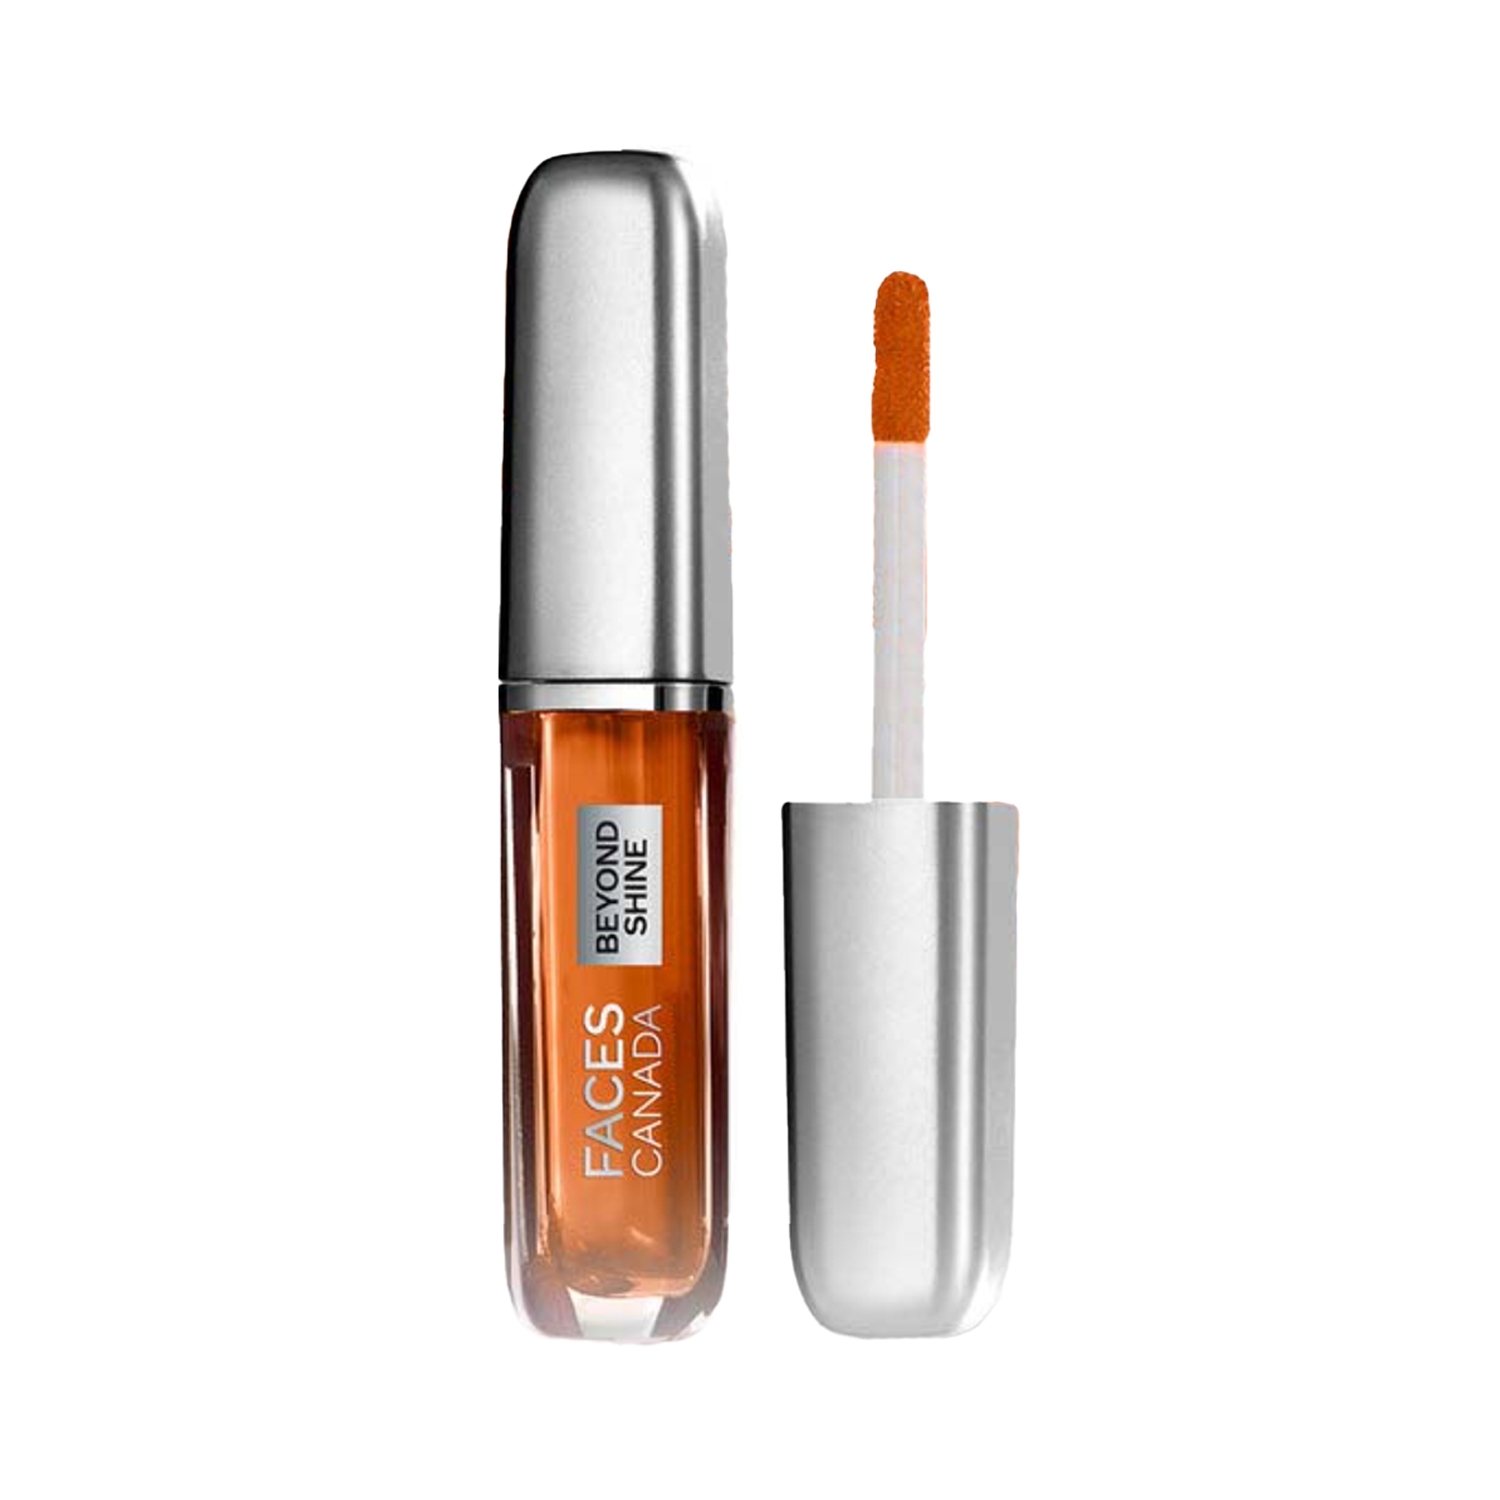 Faces Canada | Faces Canada Beyond Shine Lip Gloss - 04 Twinster (3ml)